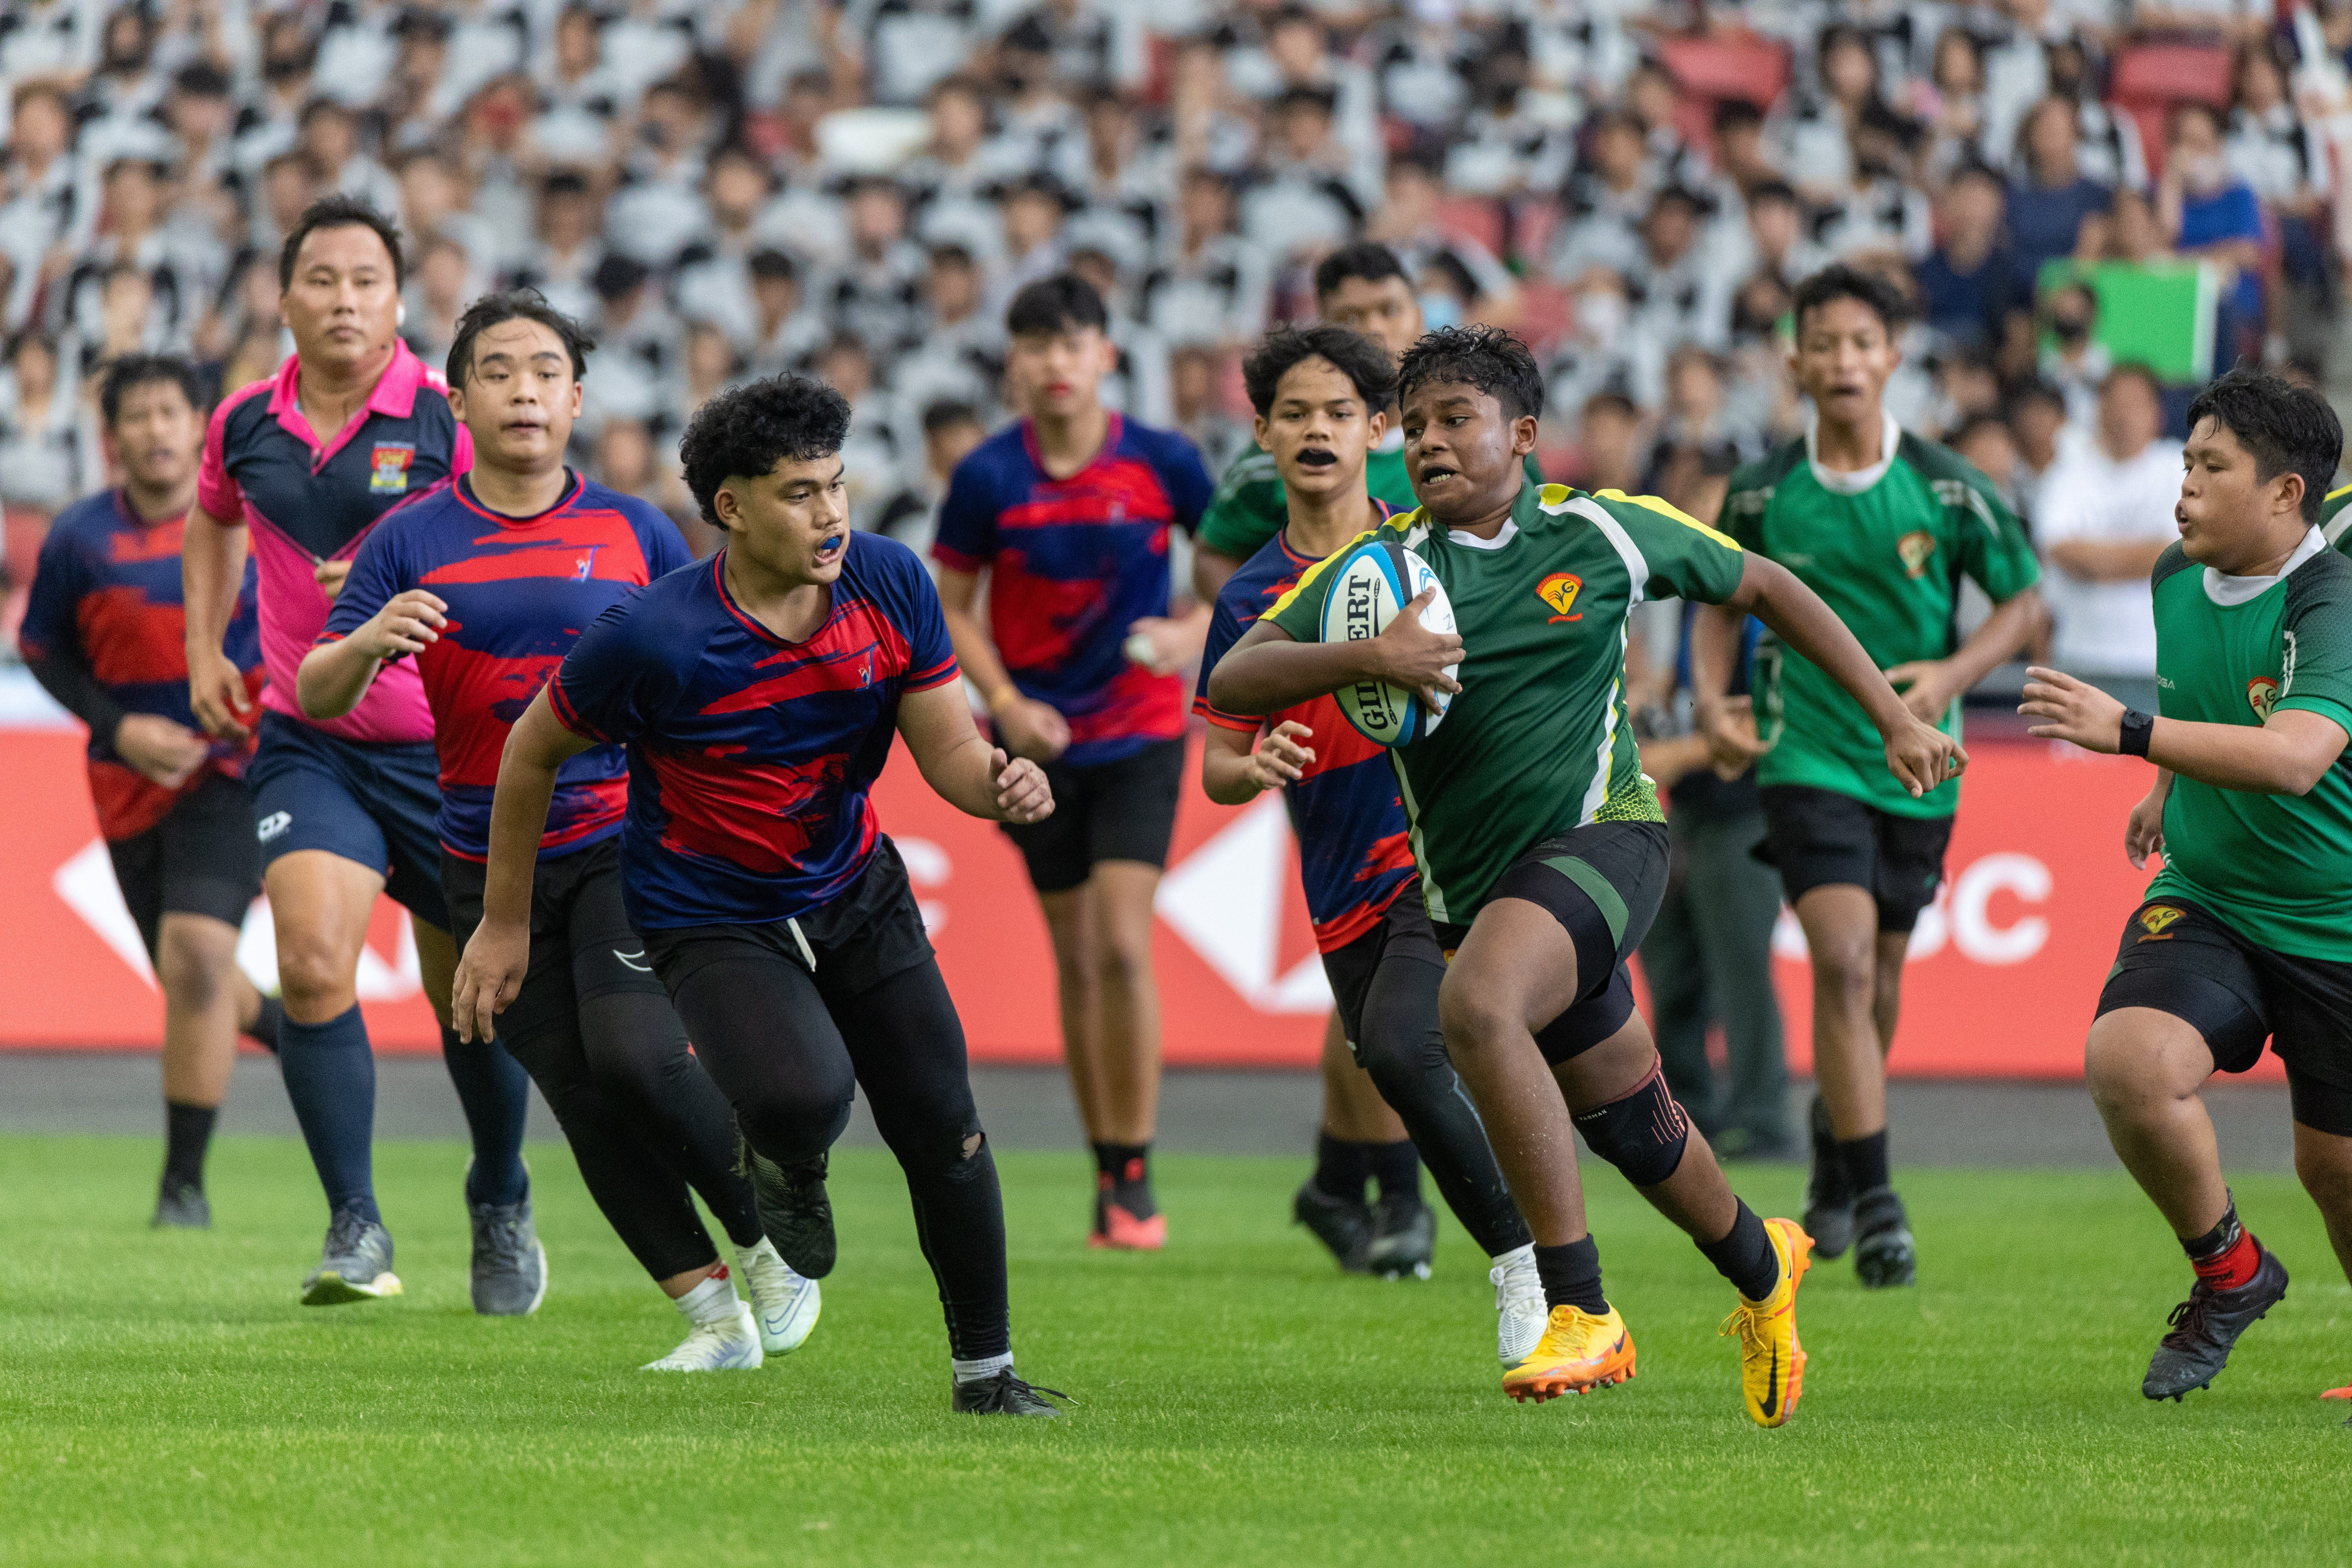 National School Games 2023 Rugby Bowl : EVGians Display Grit & Passion to Win the Gold!